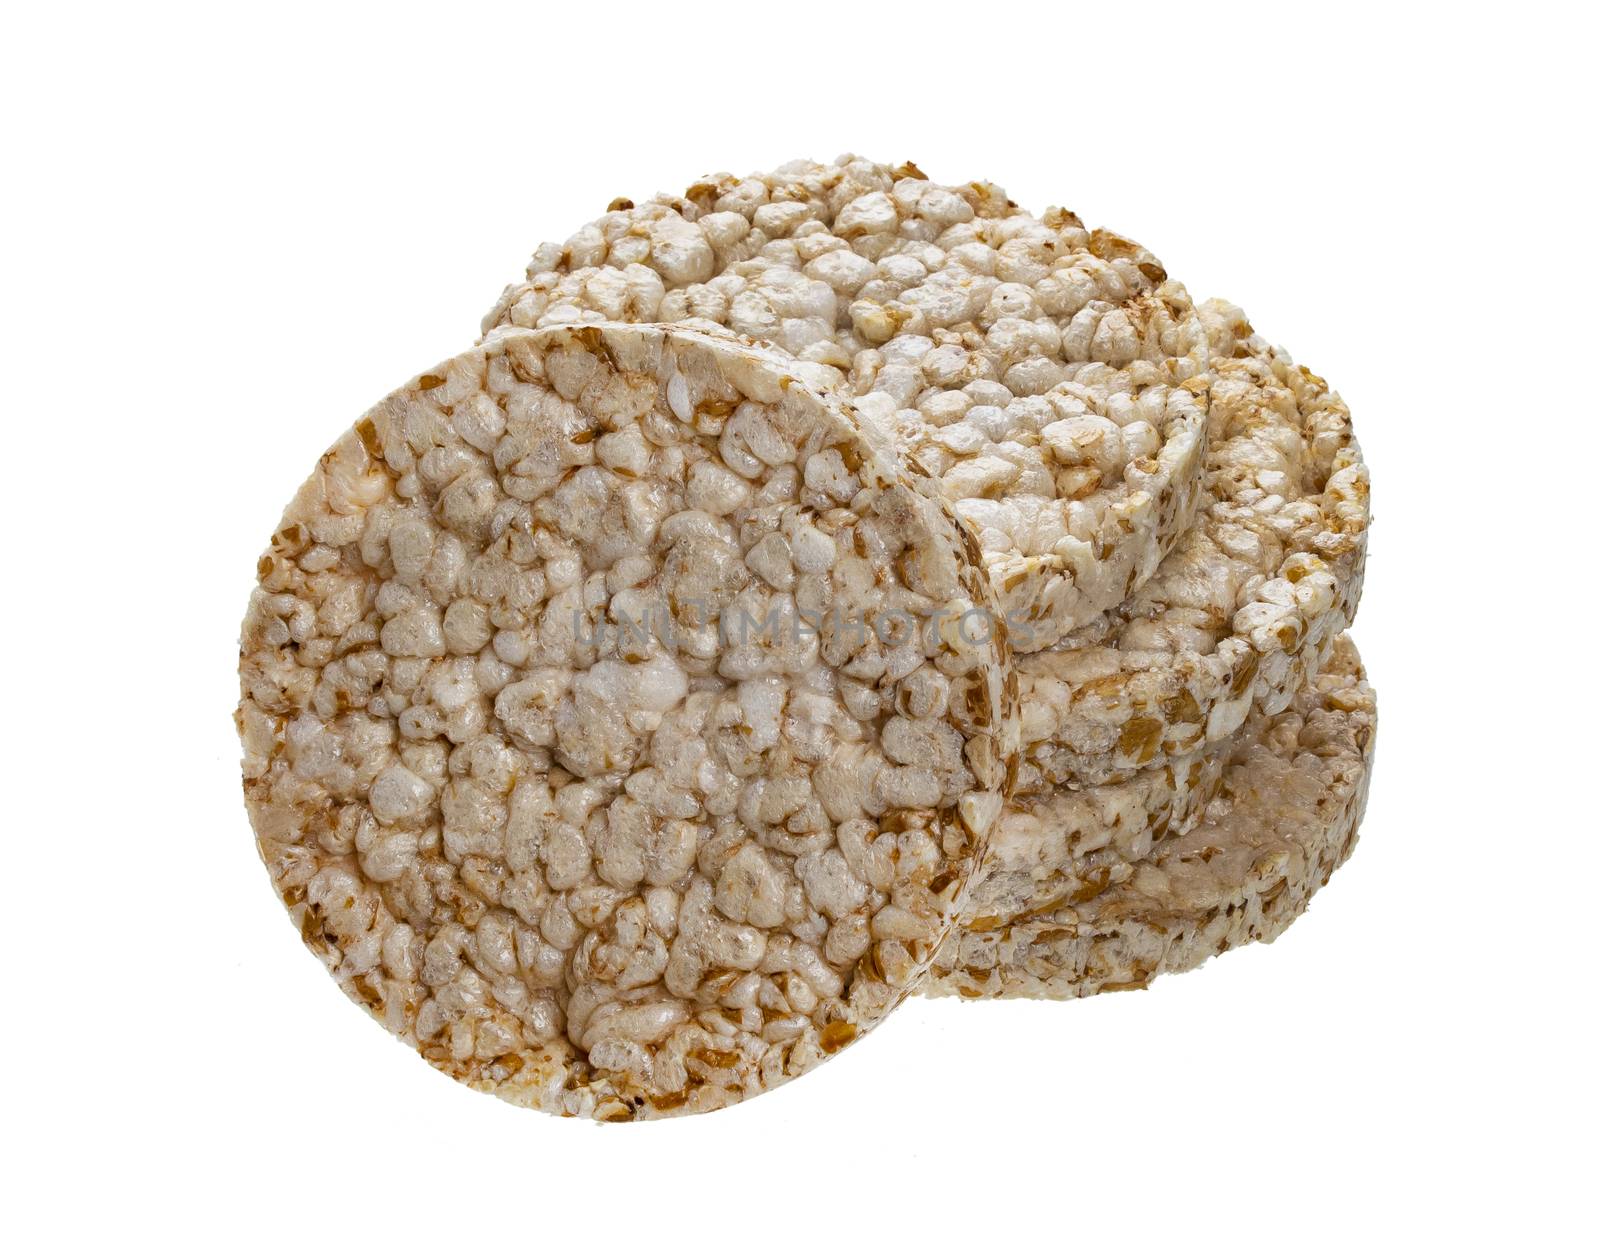 Puffed rice bread sta?k isolated on white background, crushed diet crispy round rice waffles